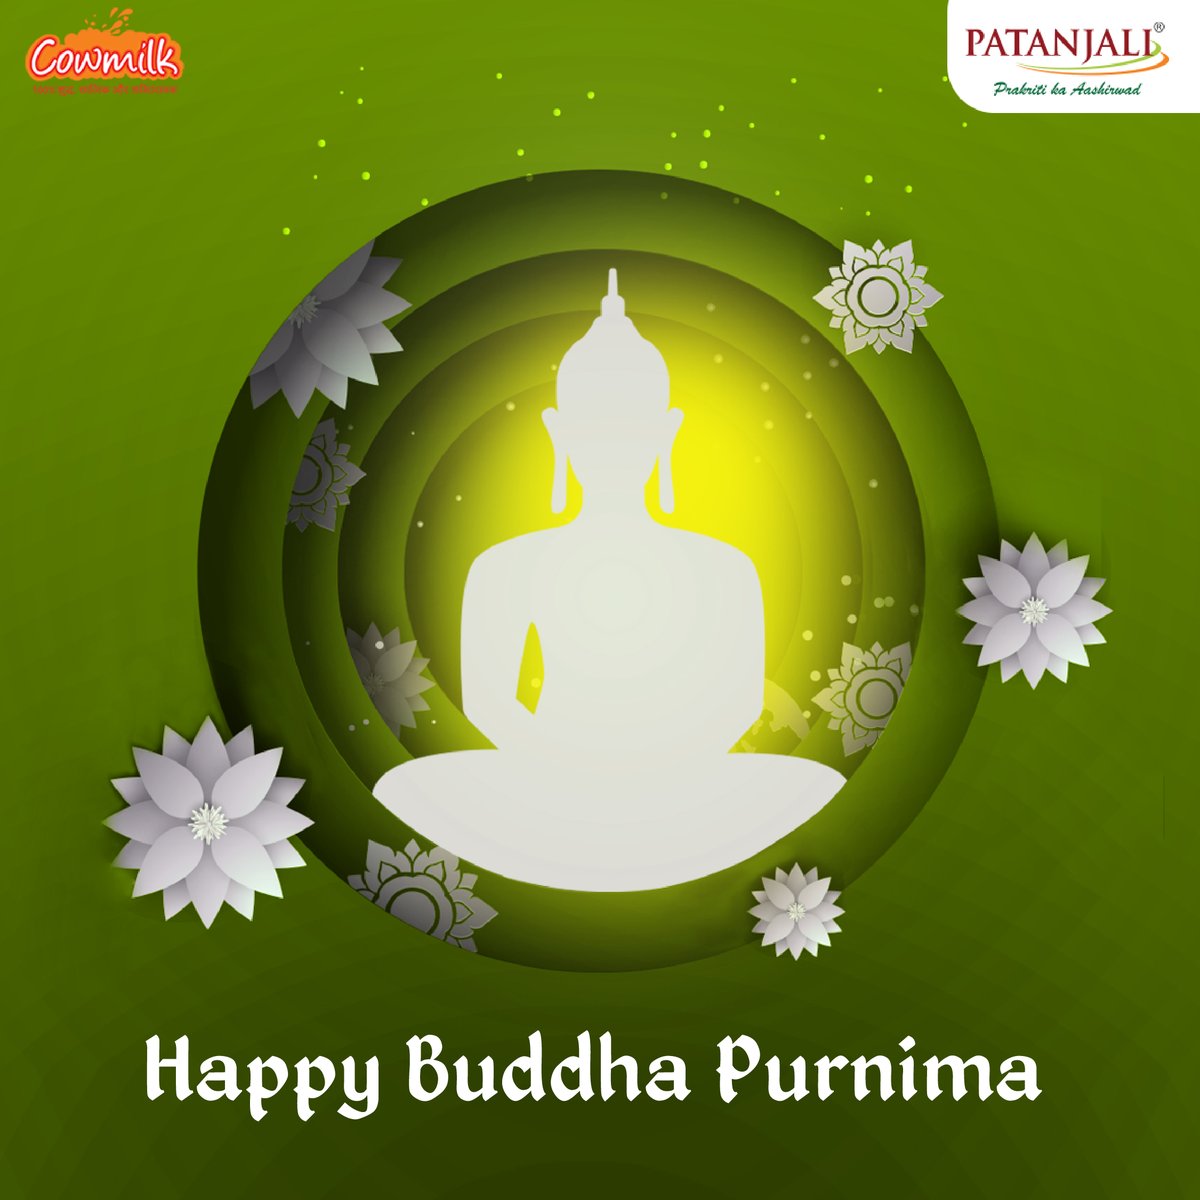 Nothing is purer than Lord Buddha's blessings. Wishing you all a very Happy Buddha Purnima!
#buddhapurnima2022 #PatanjaliDairy #patanjalidairyprducts